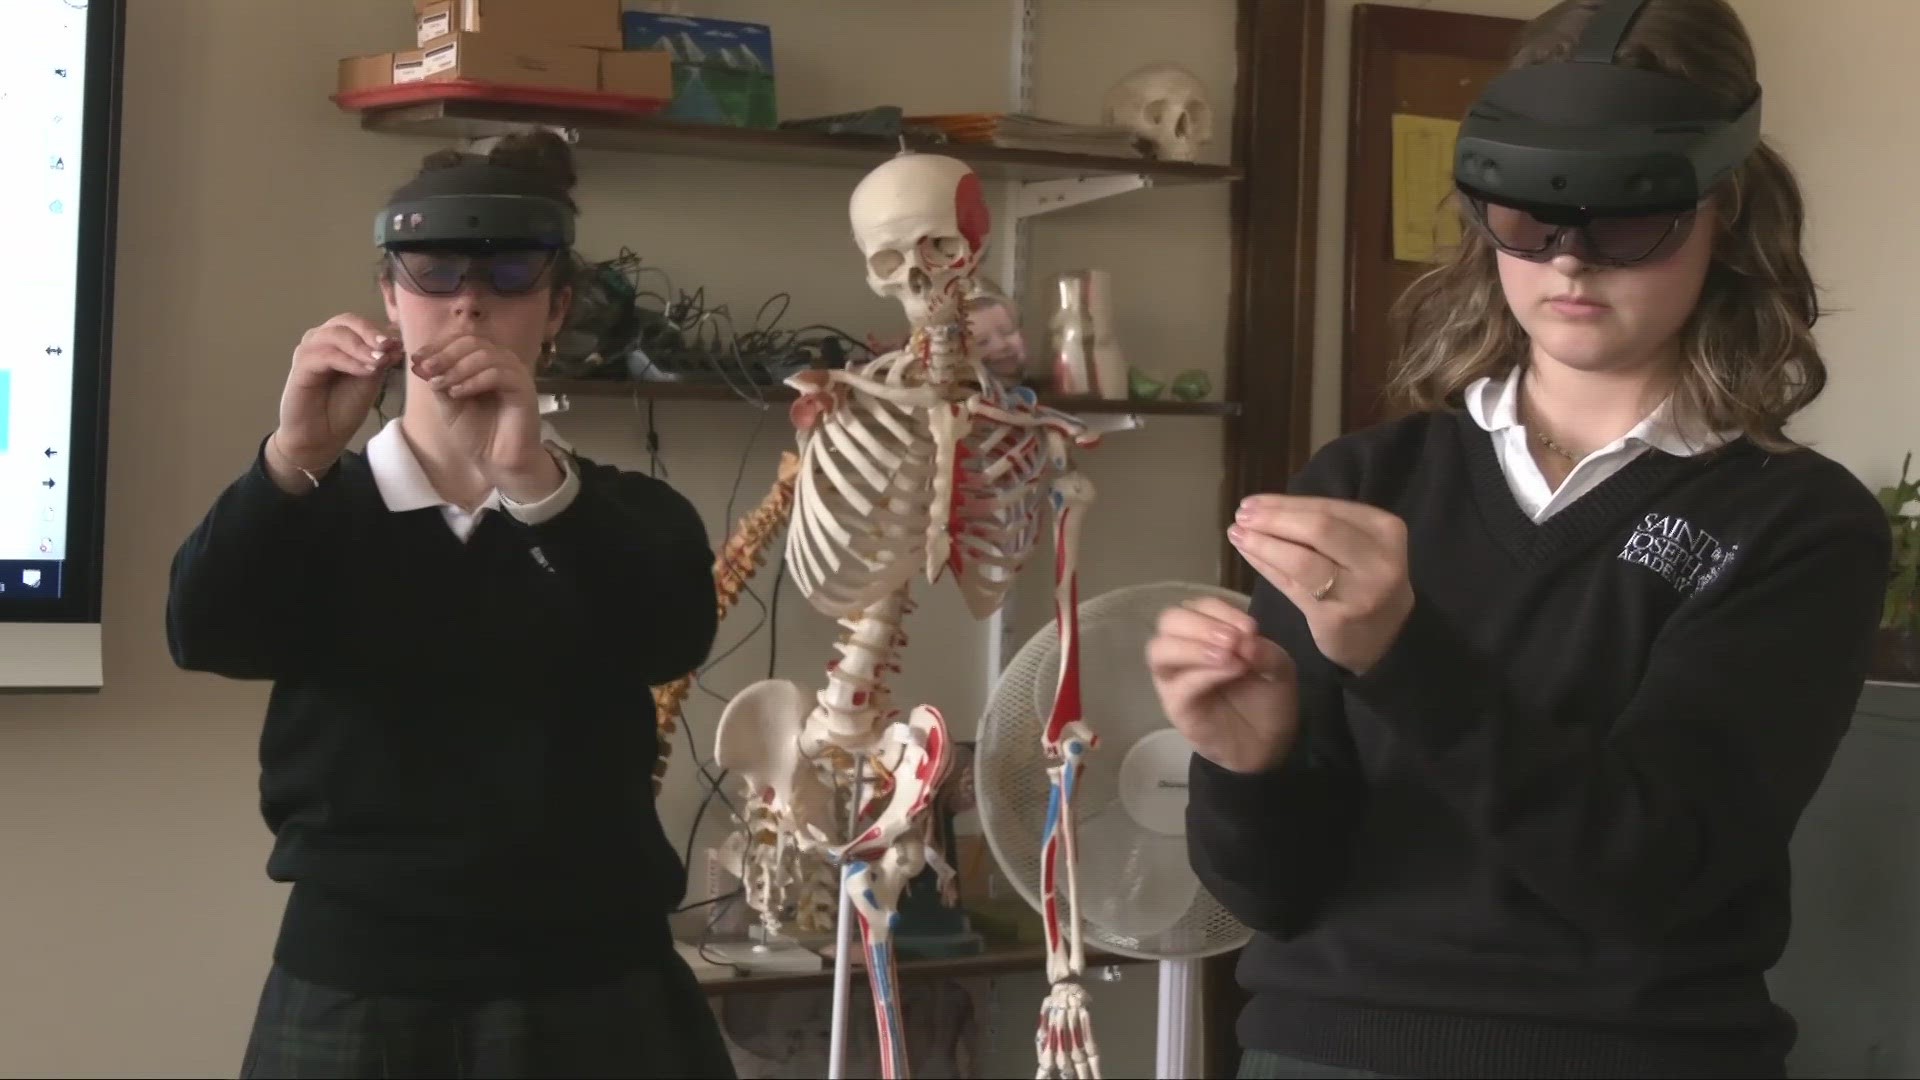 The local school has taken learning about the human body to another level.